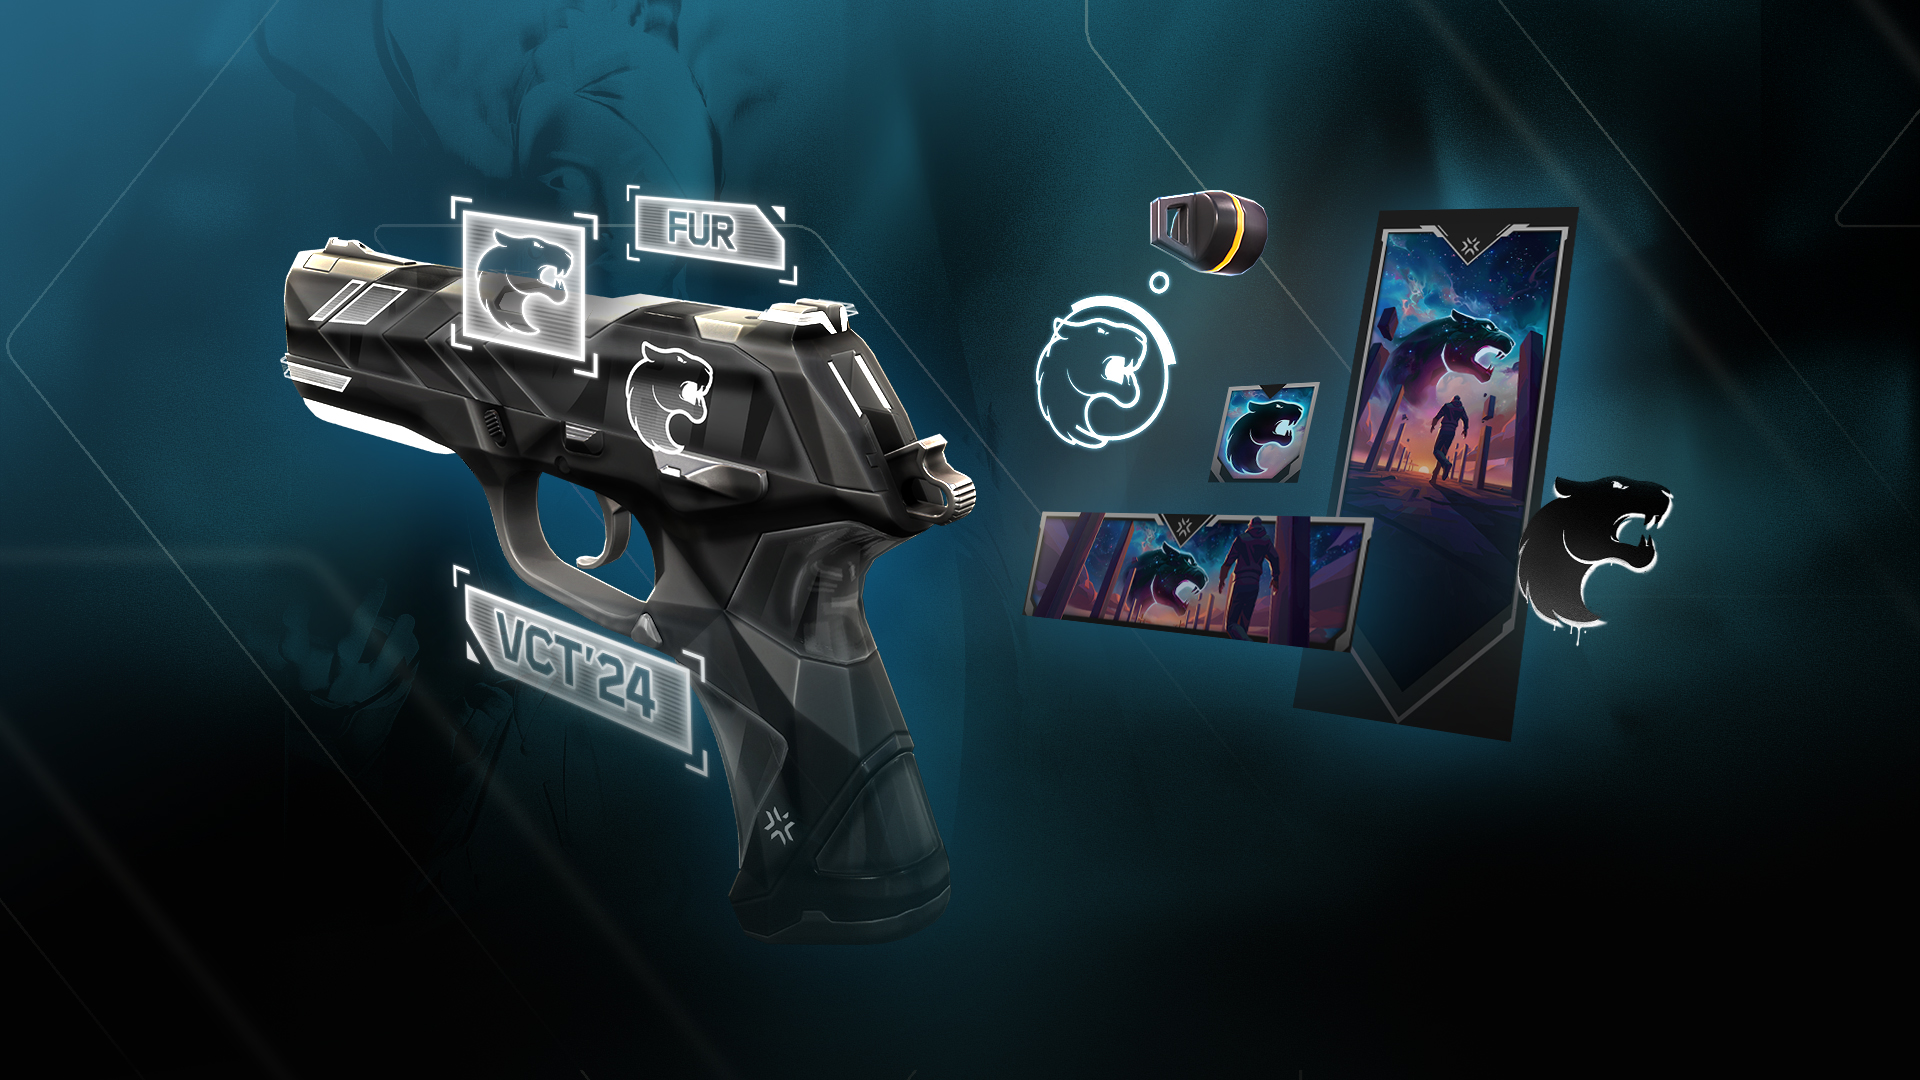 Furia VCT Team Capsule. (Image Credits: Riot Games)